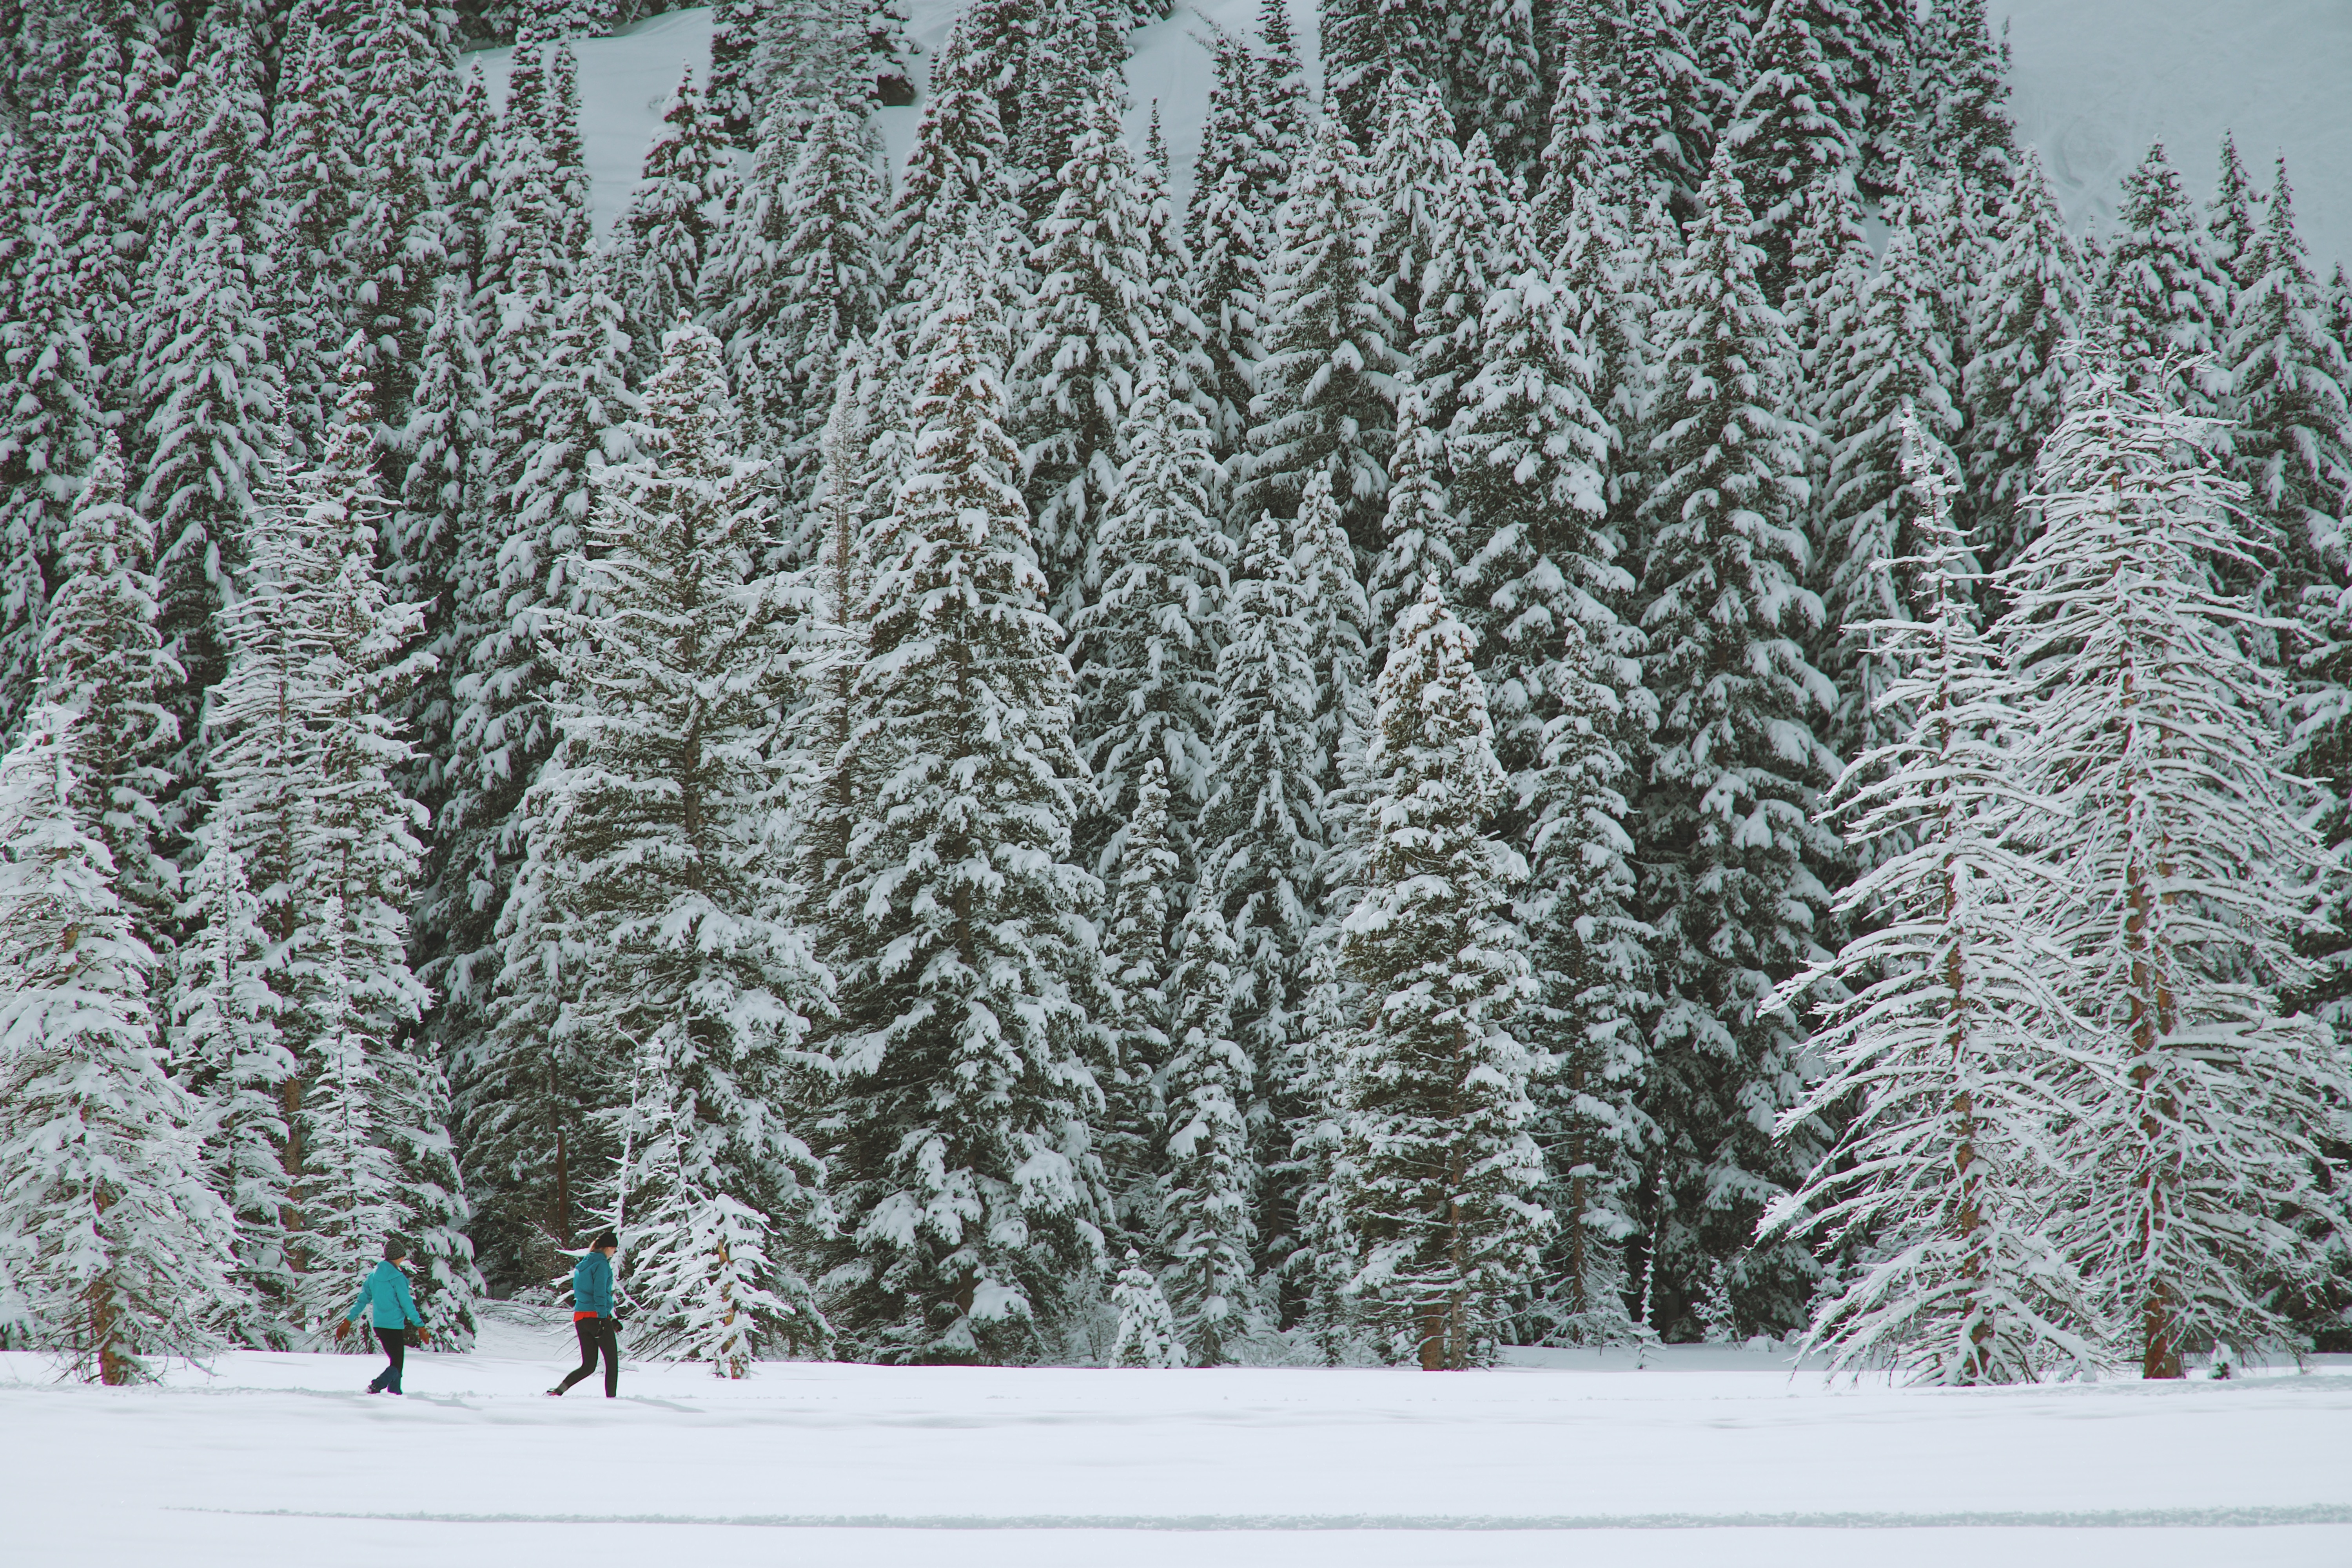 two person walking on snow near pine trees